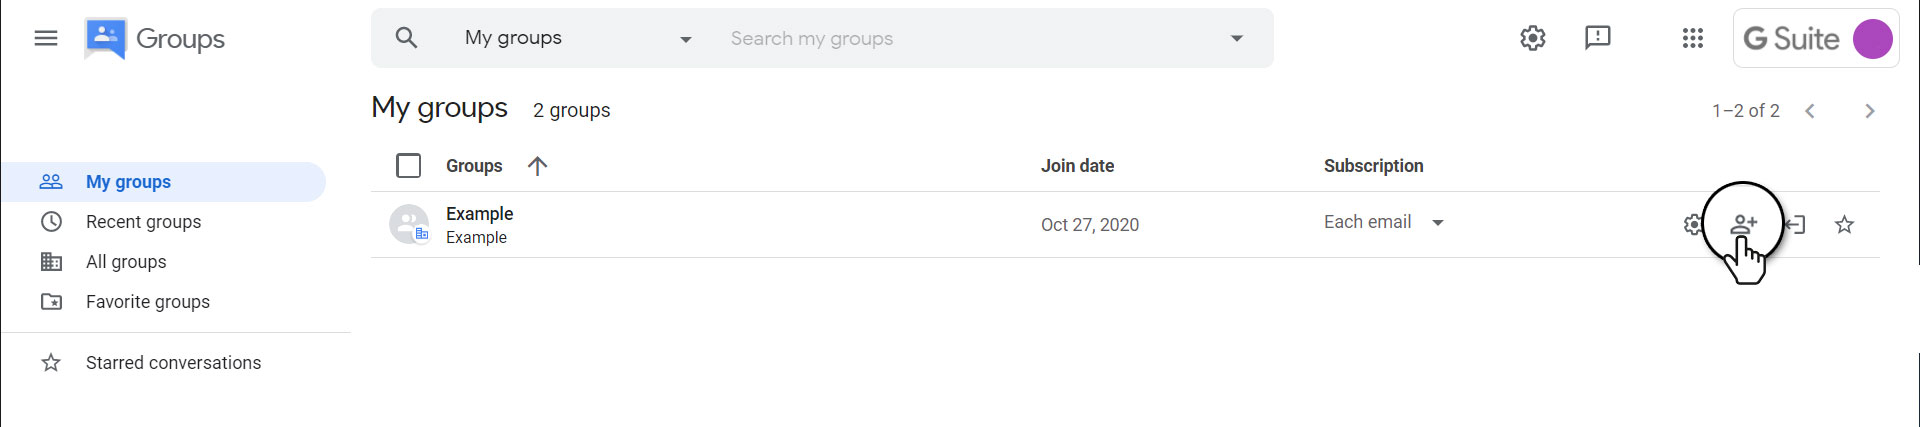 Add members to Group button